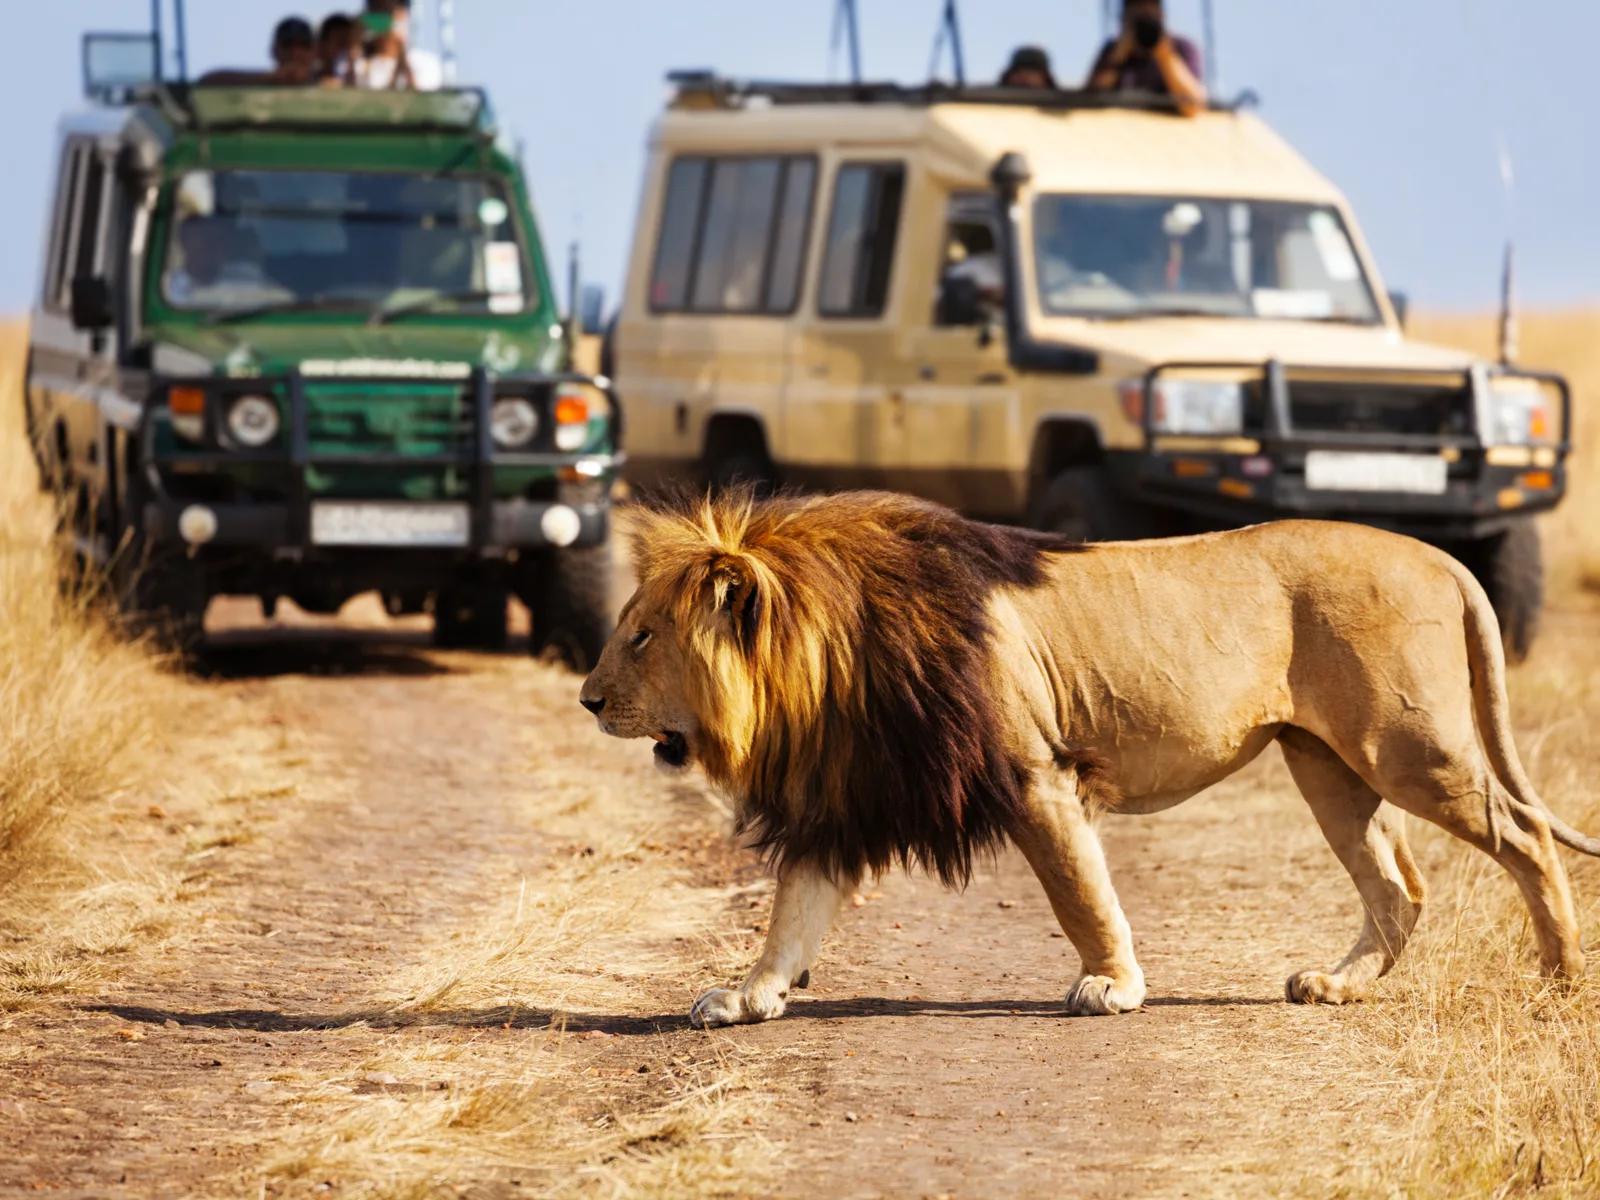 Big lion crossing the road in front of two land rovers at Masai Mara National Reserve, one of the most popular safaris in Africa